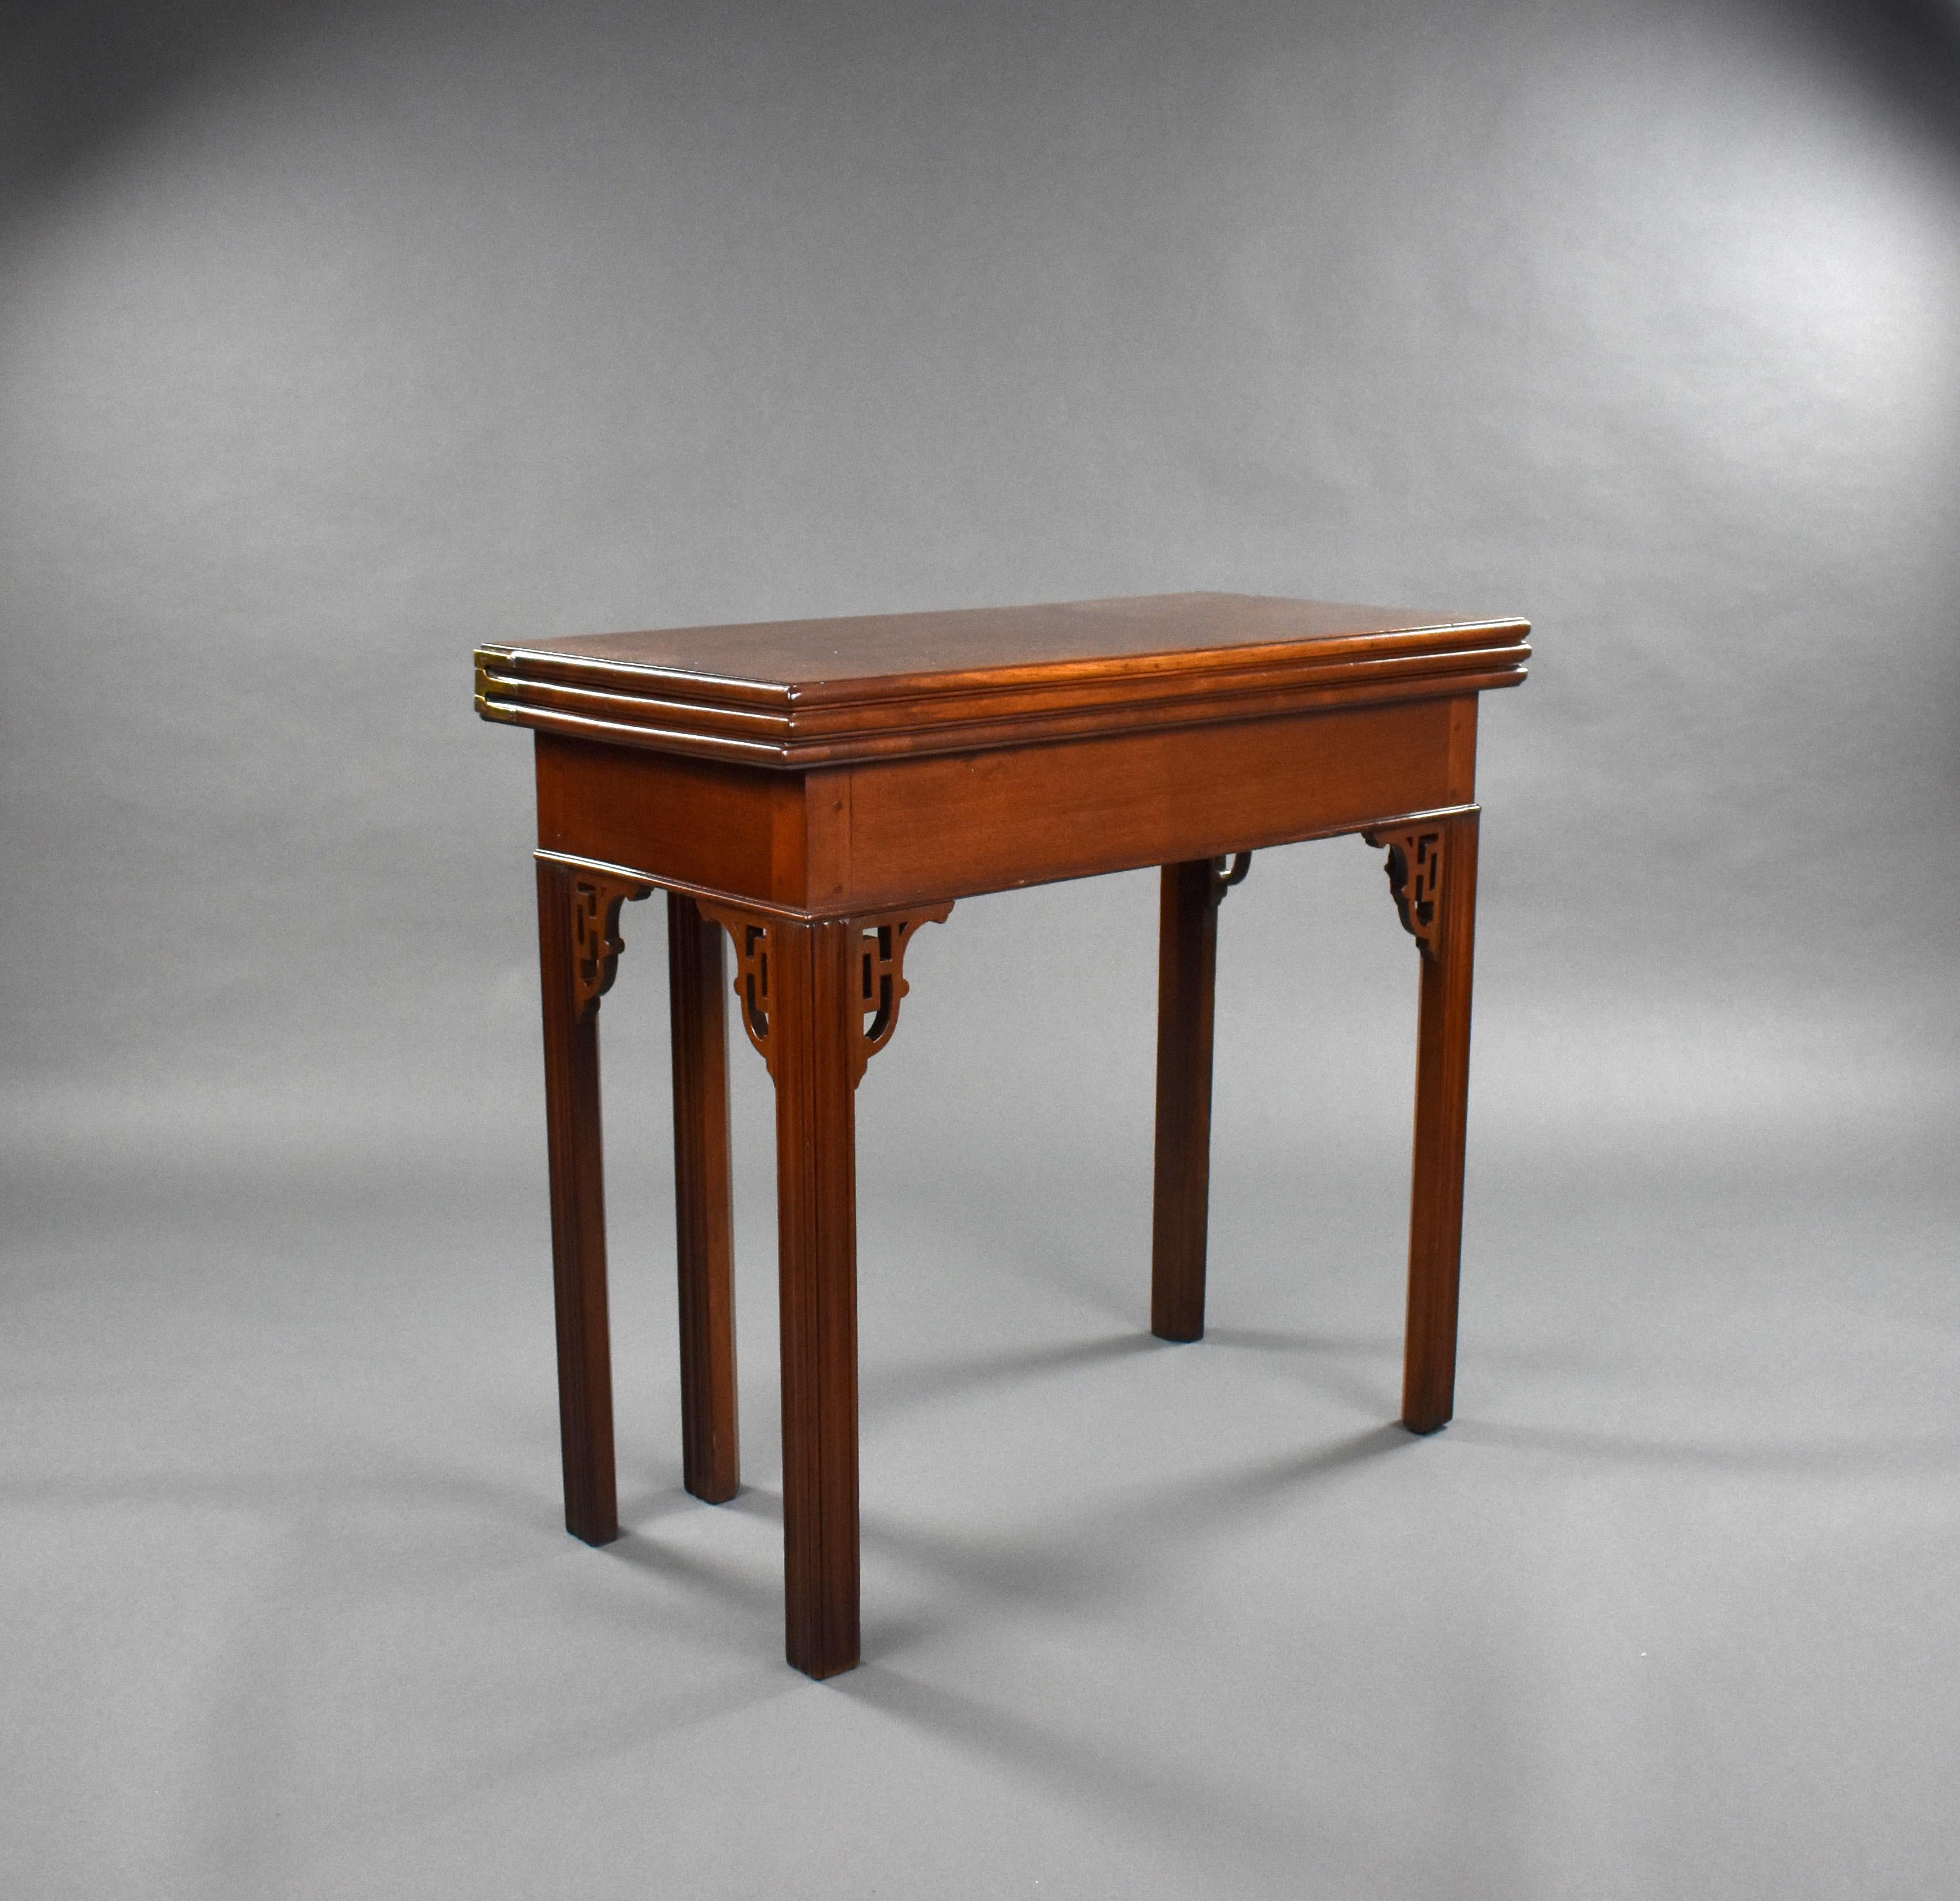 For sale is a good quality George III mahogany triple top card table, opening out into a tea table, with the other top opening to a card table with a green baise lining. There is a counter drawer to the rear. The card table stands on square legs and